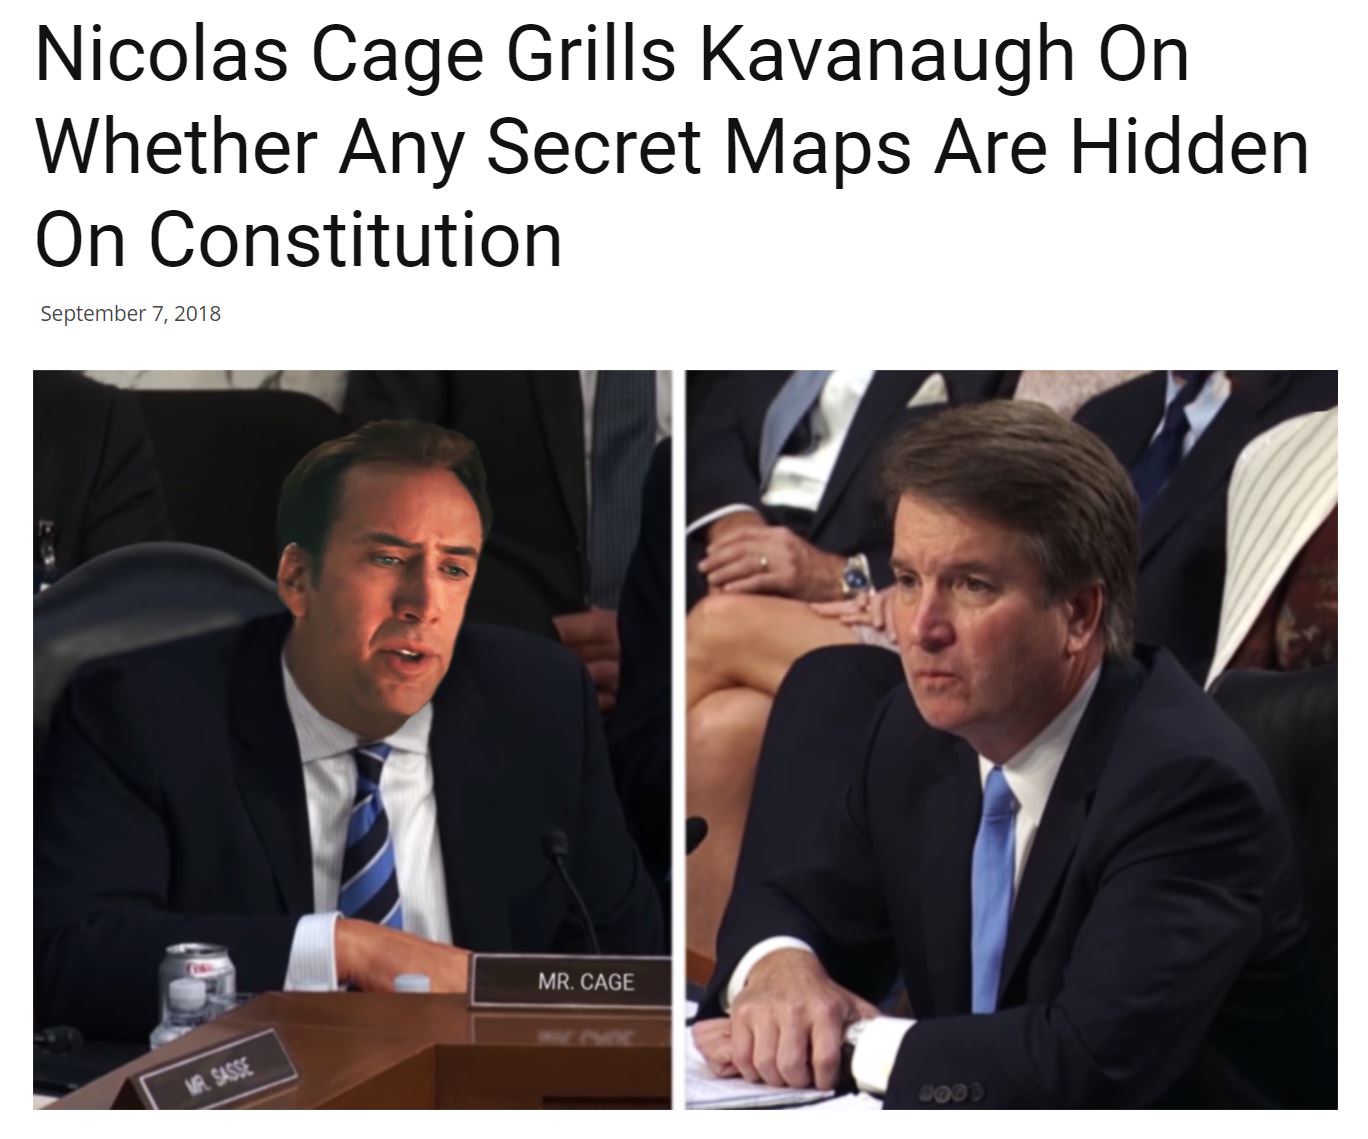 presentation - Nicolas Cage Grills Kavanaugh On Whether Any Secret Maps Are Hidden On Constitution Mr. Cage Sisse